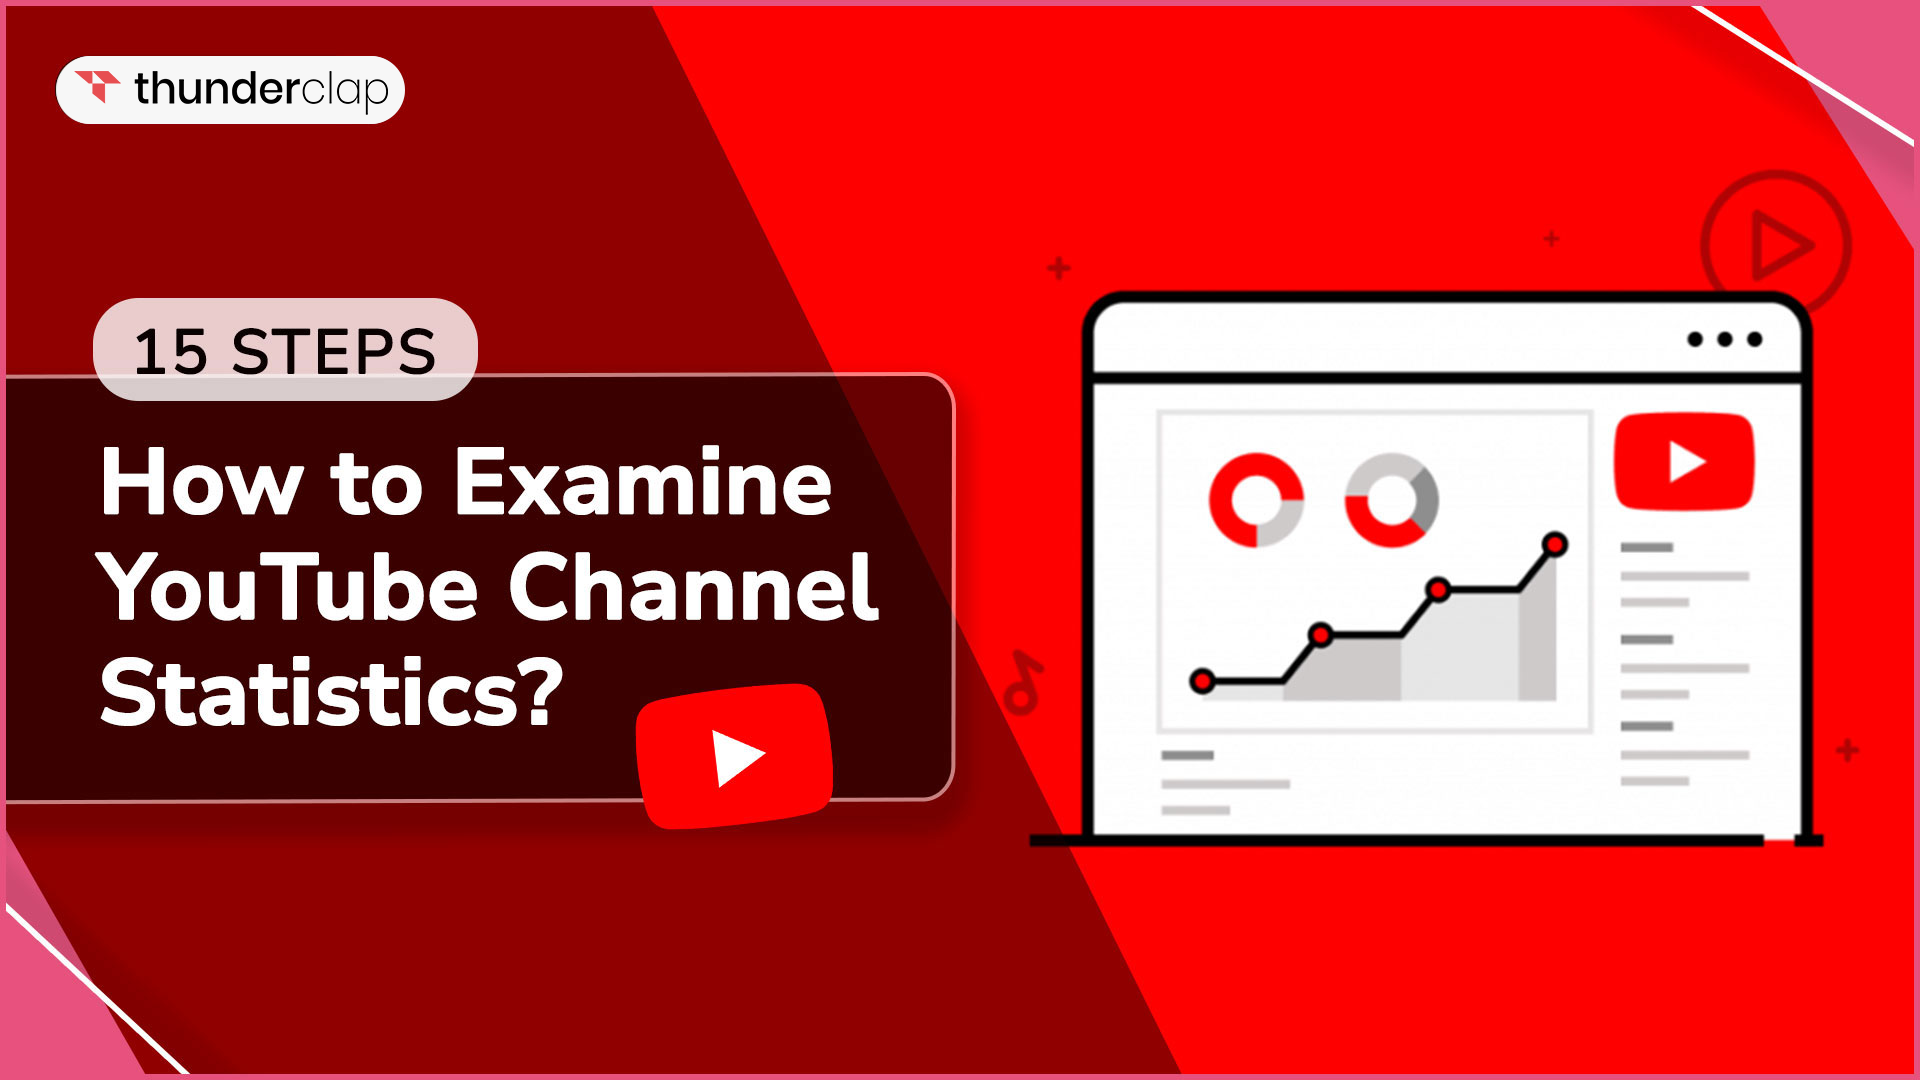 How to Examine YouTube Channel Statistics
